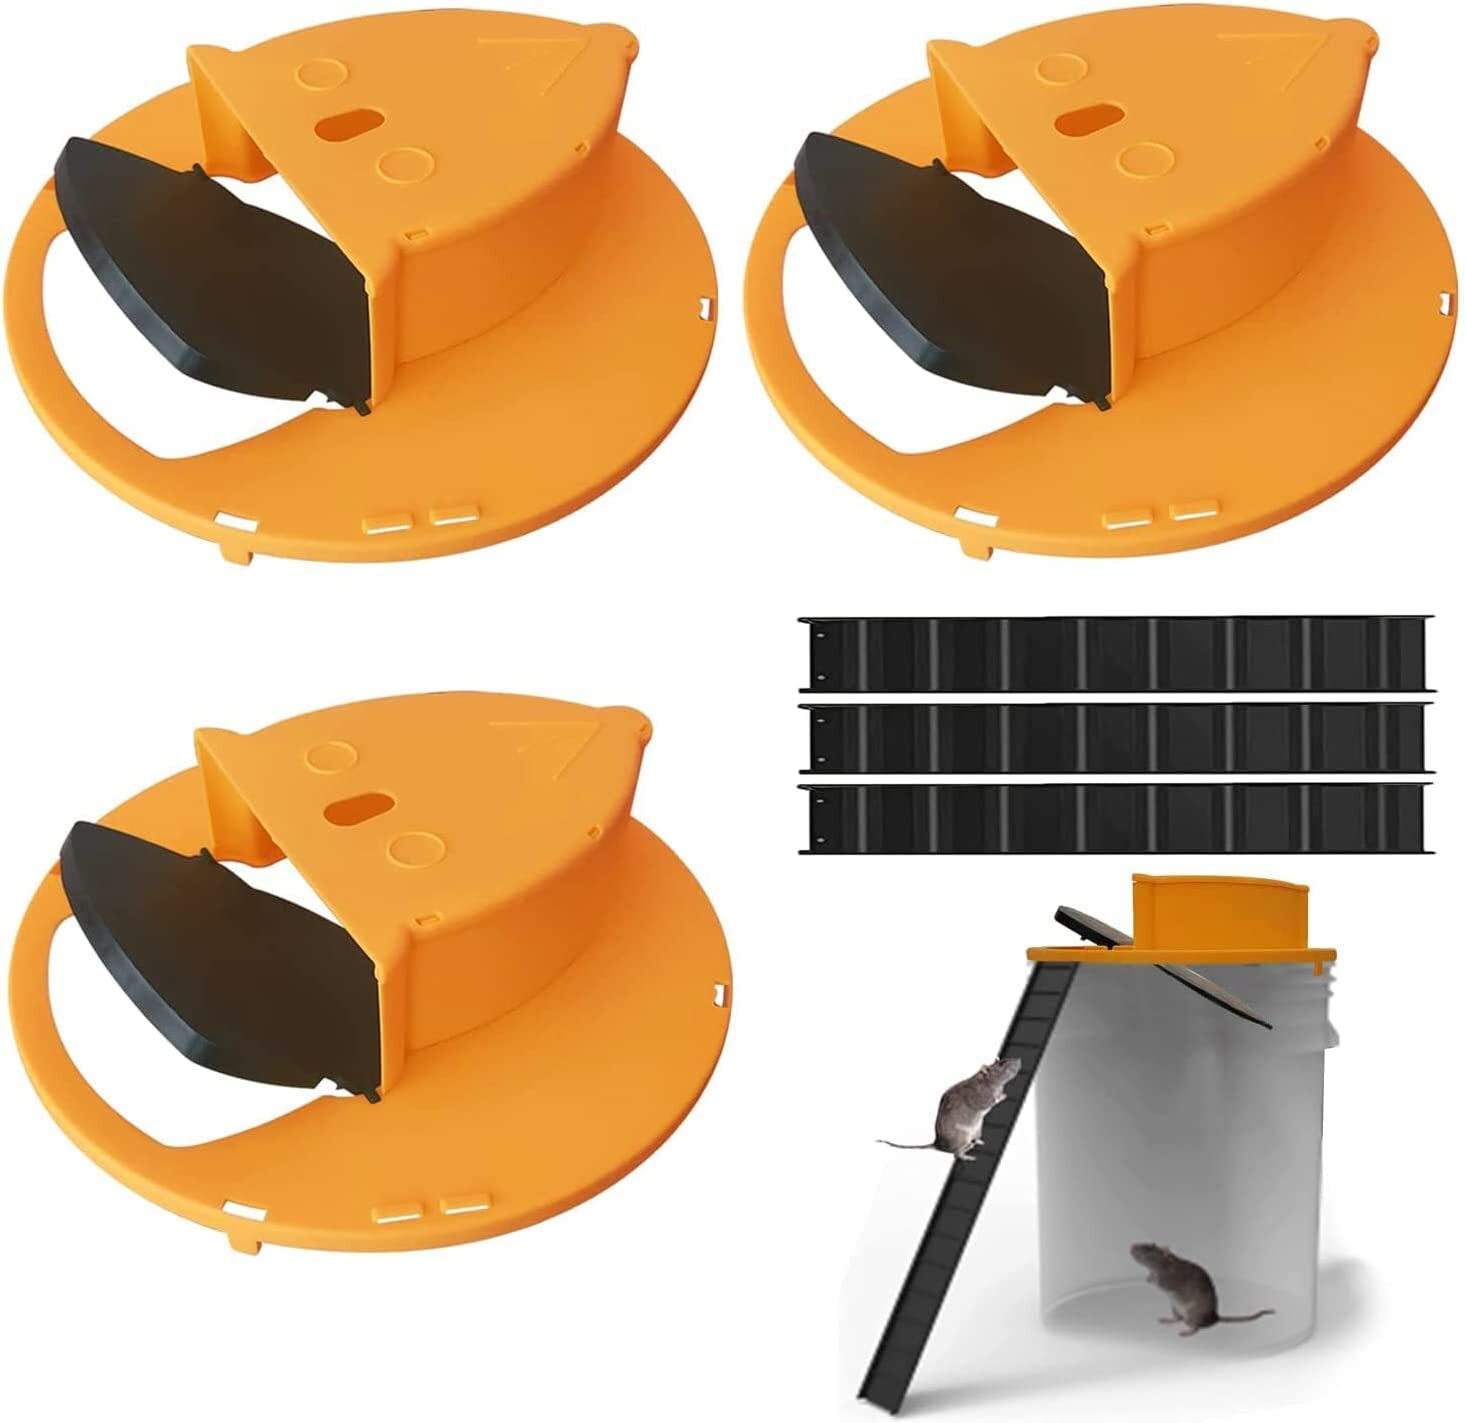 3 Packs Bucket Mouse Traps,Mousetrap Slide Bucket Lid, Mouse Catching Tool,Mouse  Trap with Flip Lid Mousetrap Catcher Indoor Outdoor 